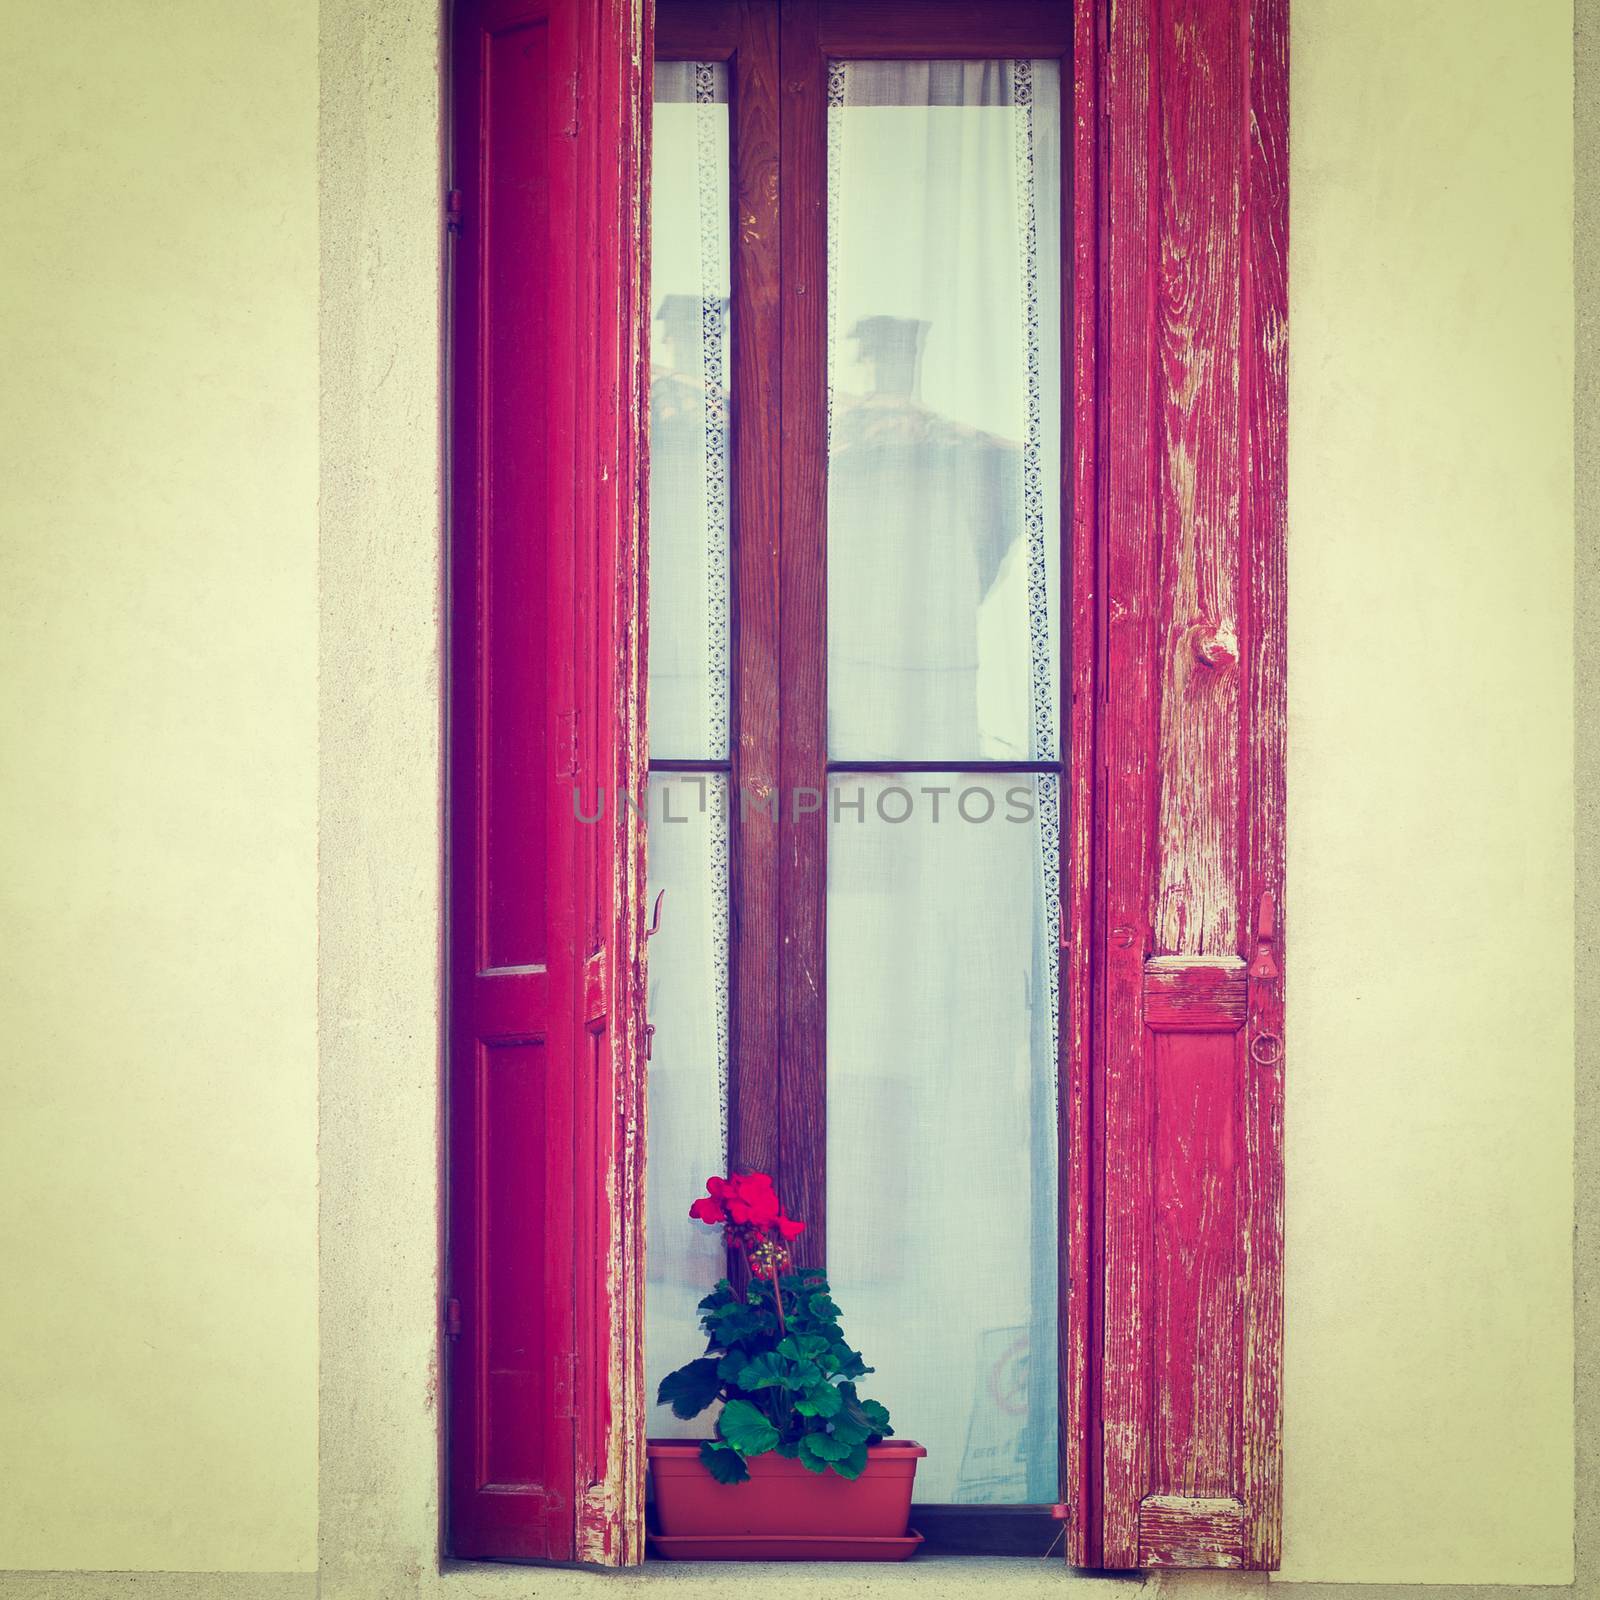 Window on the Facade of the Restored Italian Home, Instagram Effect